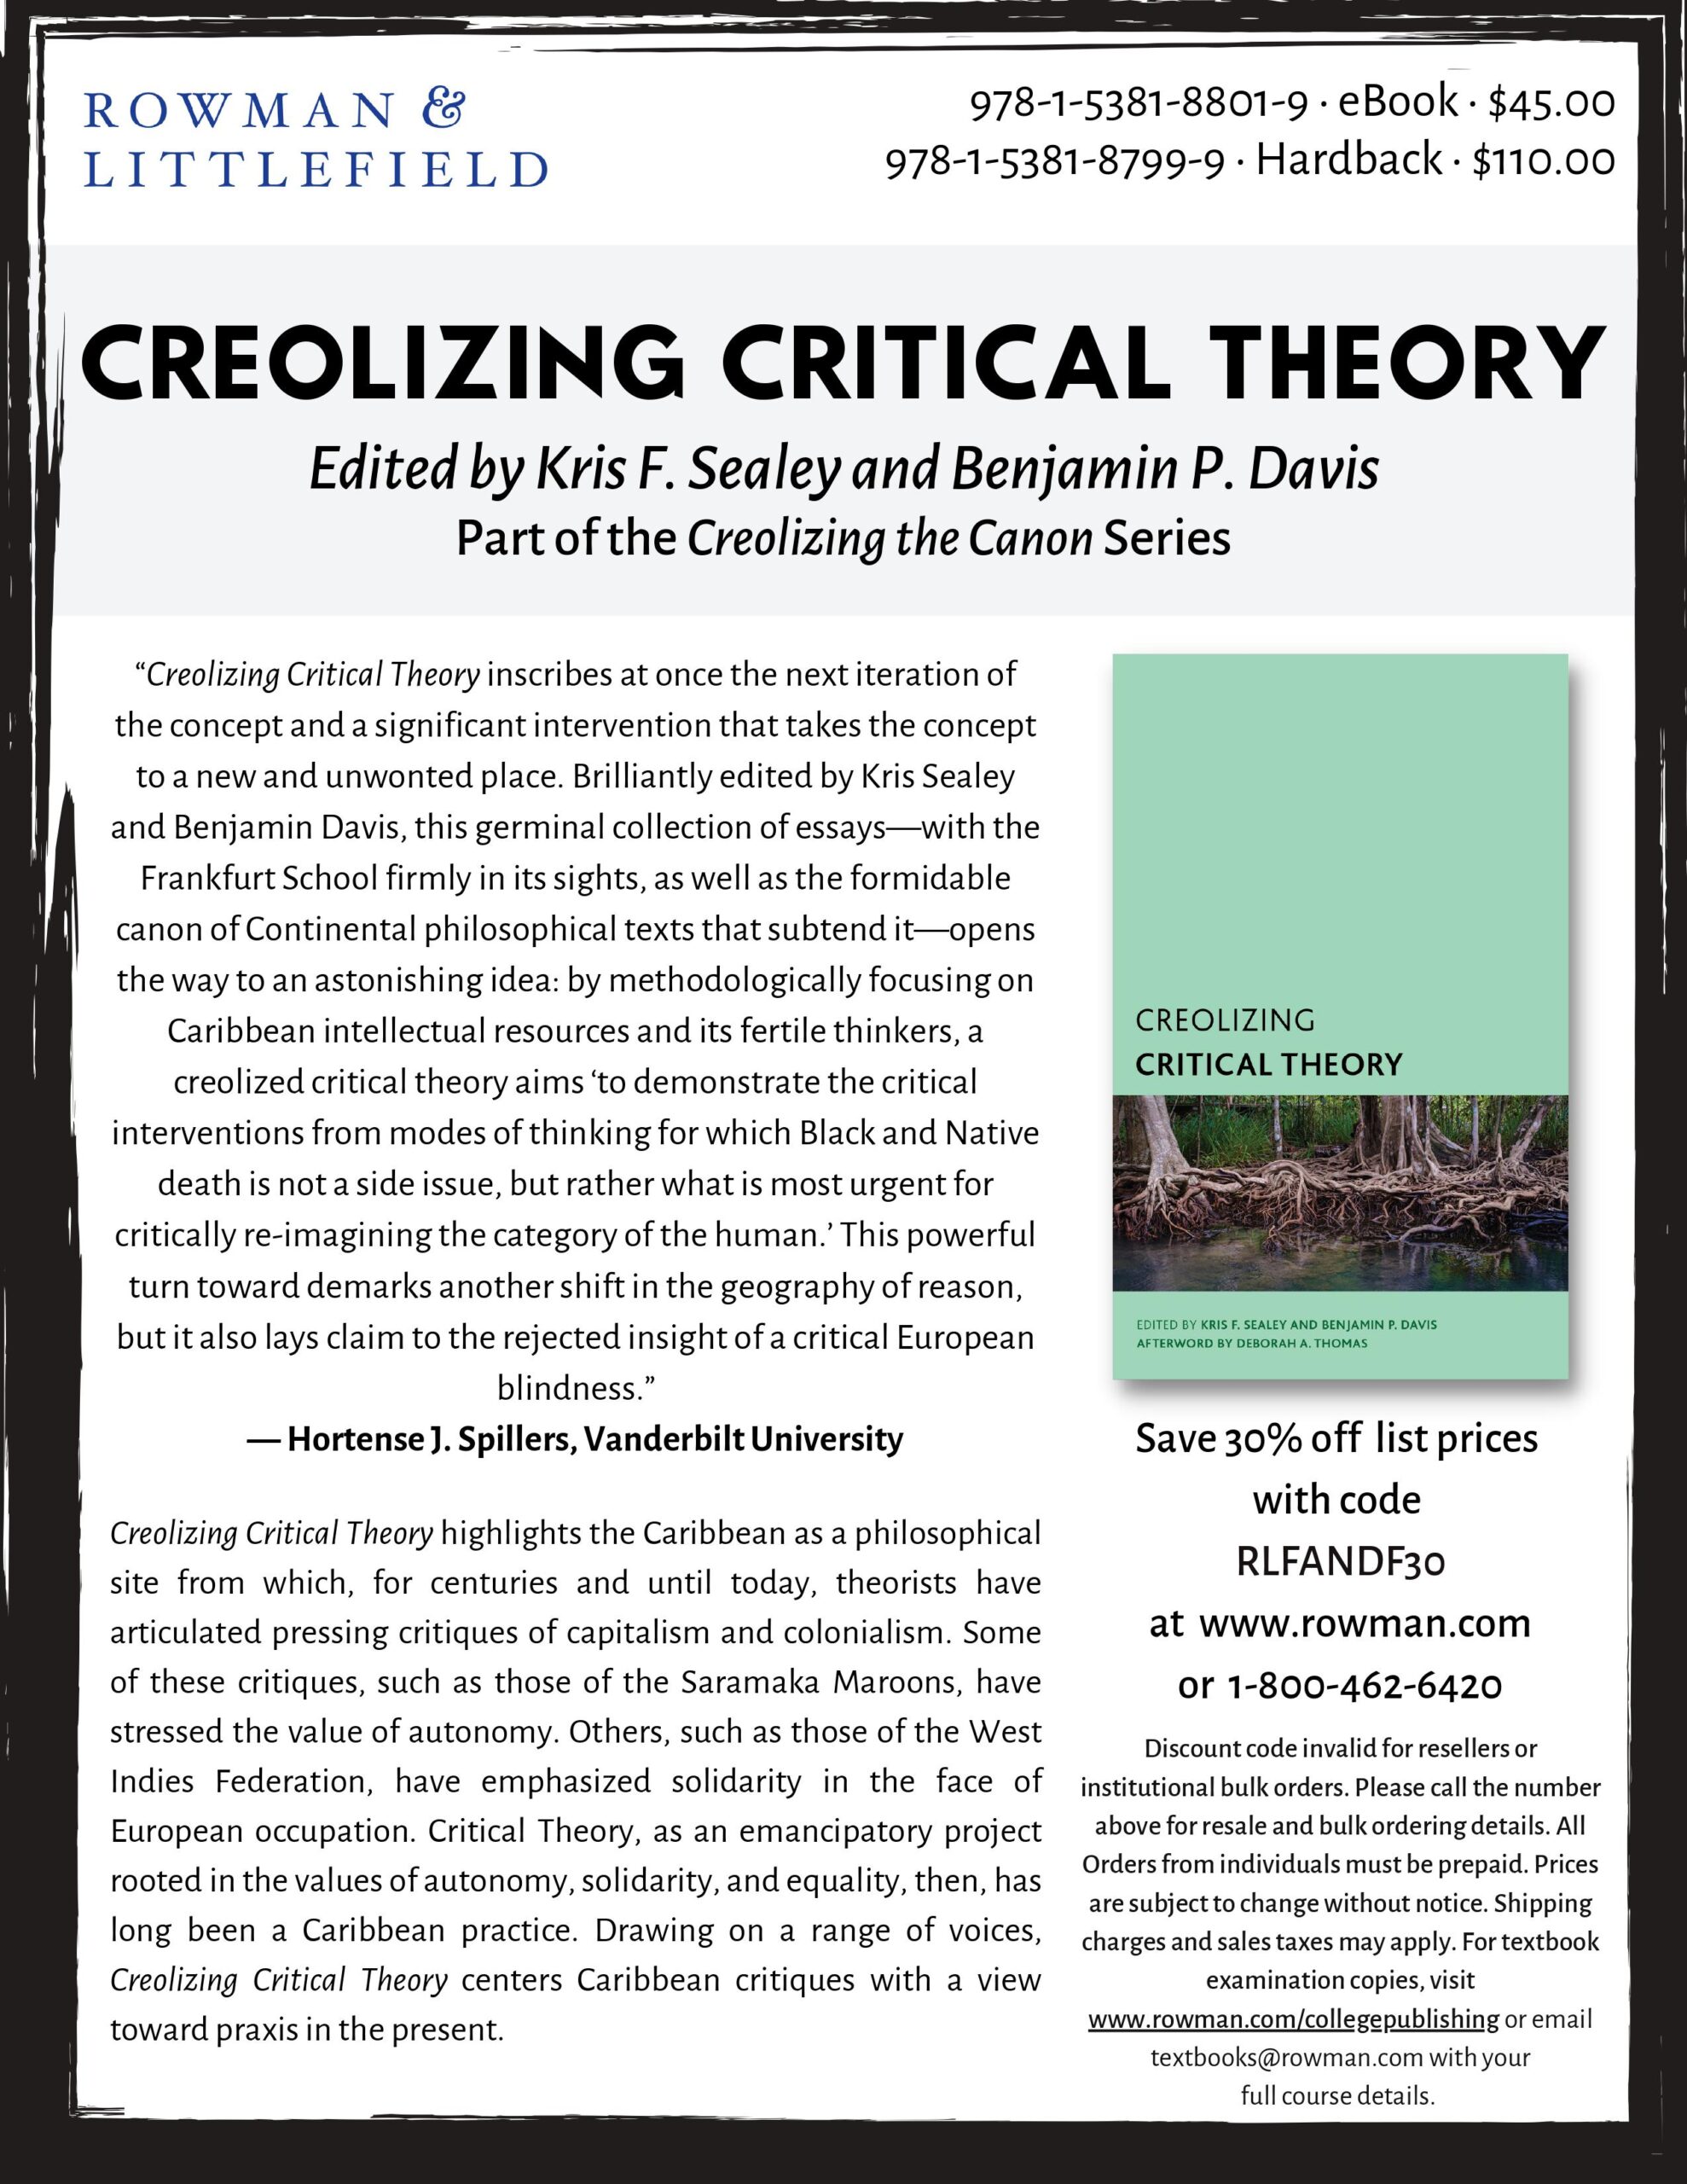 A flyer for "Creolizing Critical Theory," edited by Kris F. Sealey and Benjamin P. Davis. Part of the "Creolizing the Canon" Series. Save 30% off list prices with code RLFANDF30 at www.rowman.com or 1-800-462-6420.